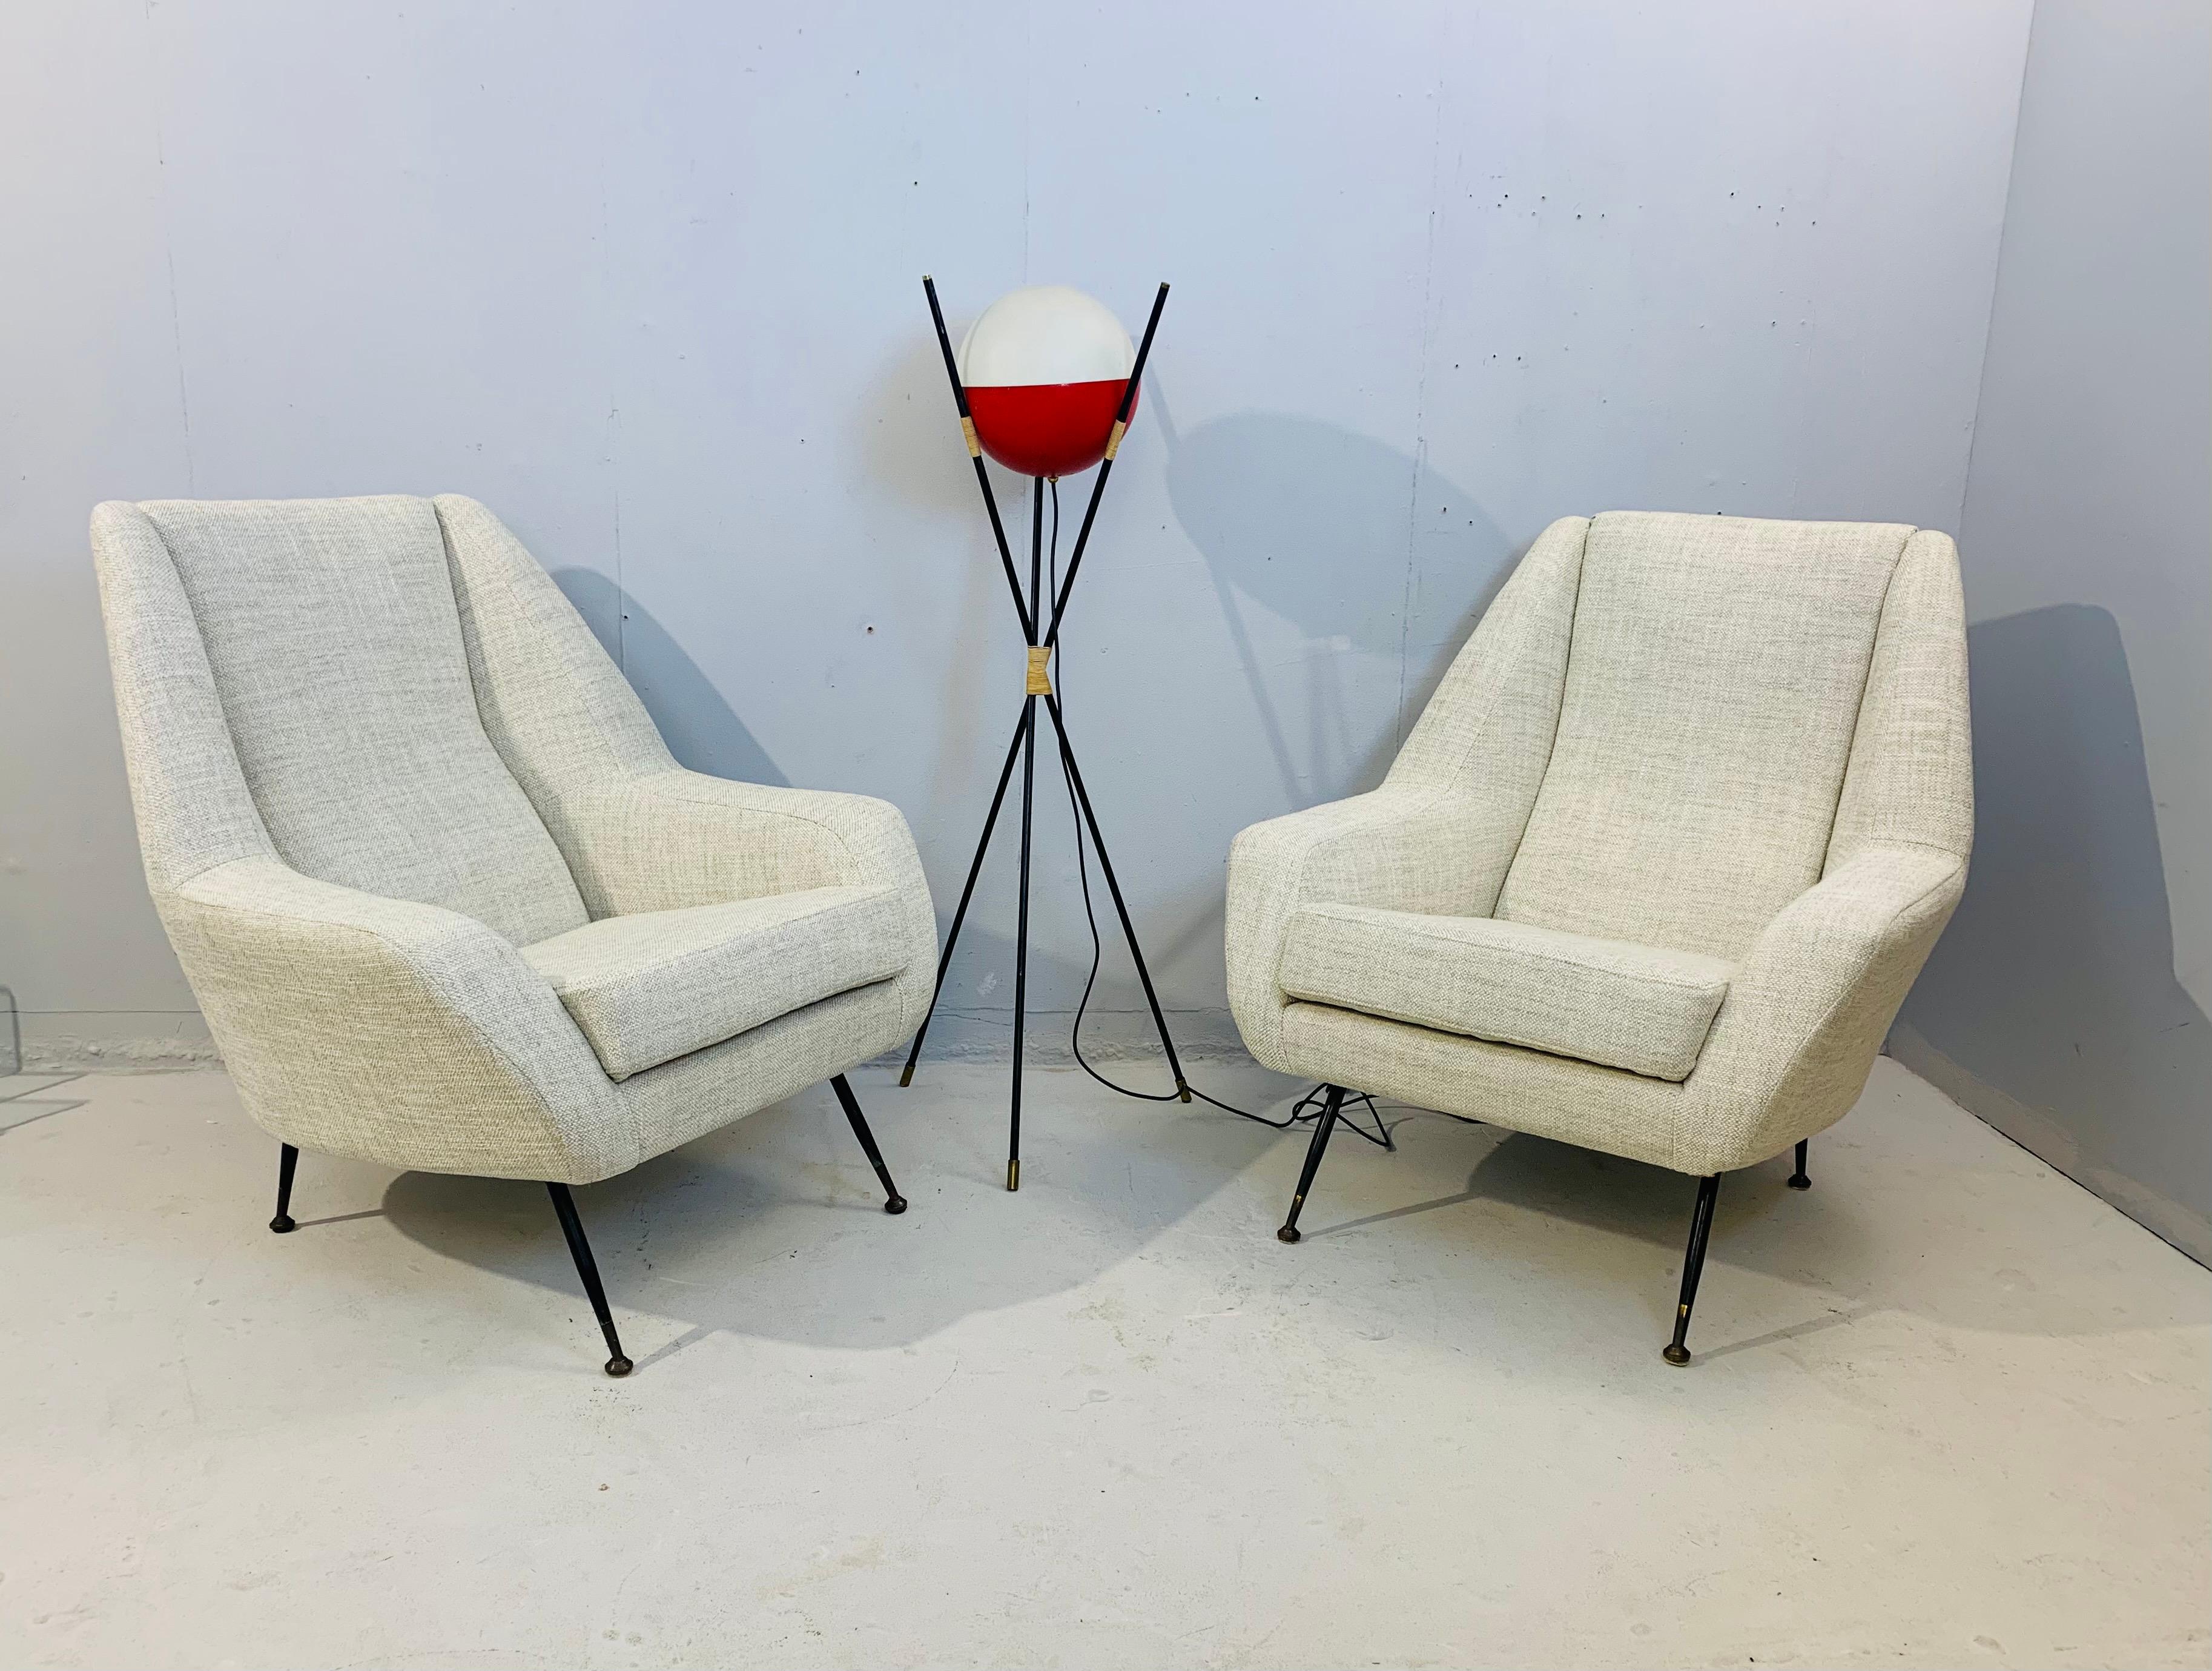 Pair of Mid-Century Modern Italian Armchairs in White Fabric, circa 1950 For Sale 3